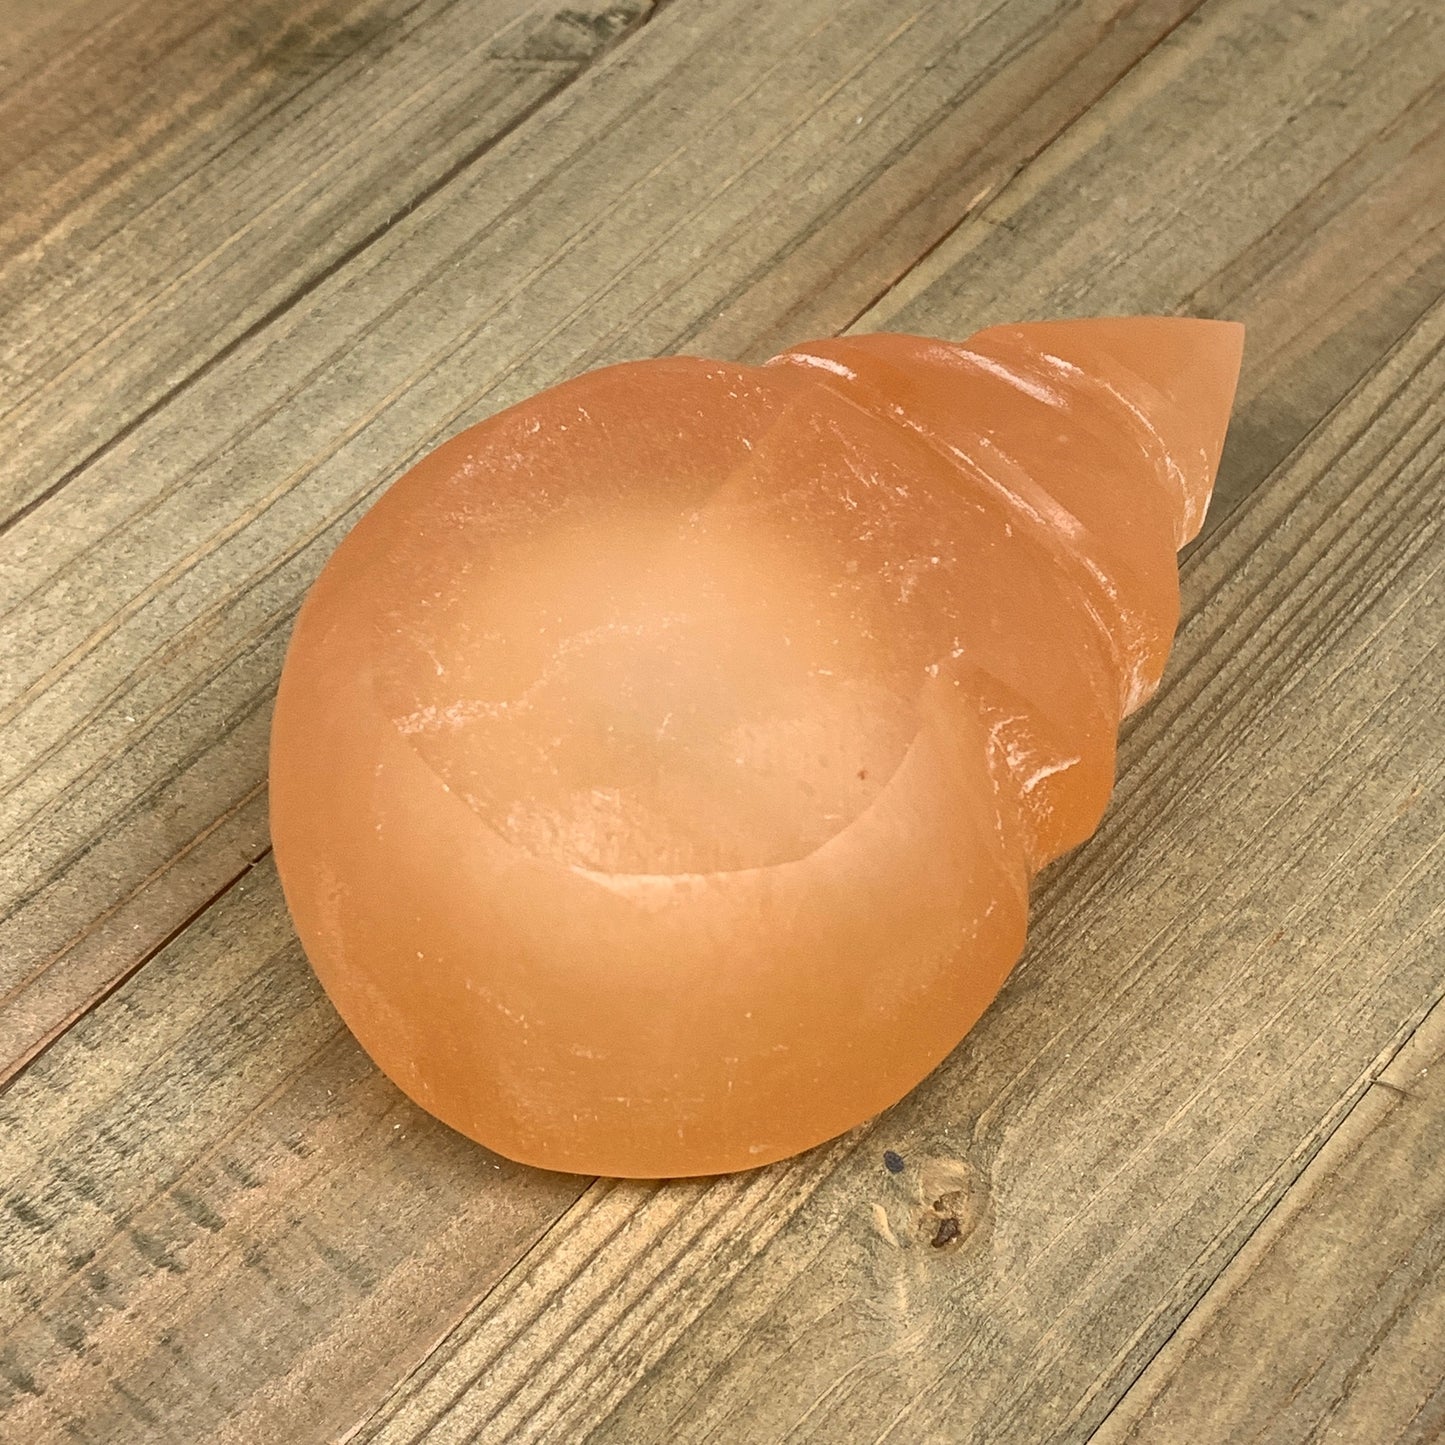 400-430g, 4.5"x2.8"x2" Orange Selenite Candle Holder Pear Shape from Morocco